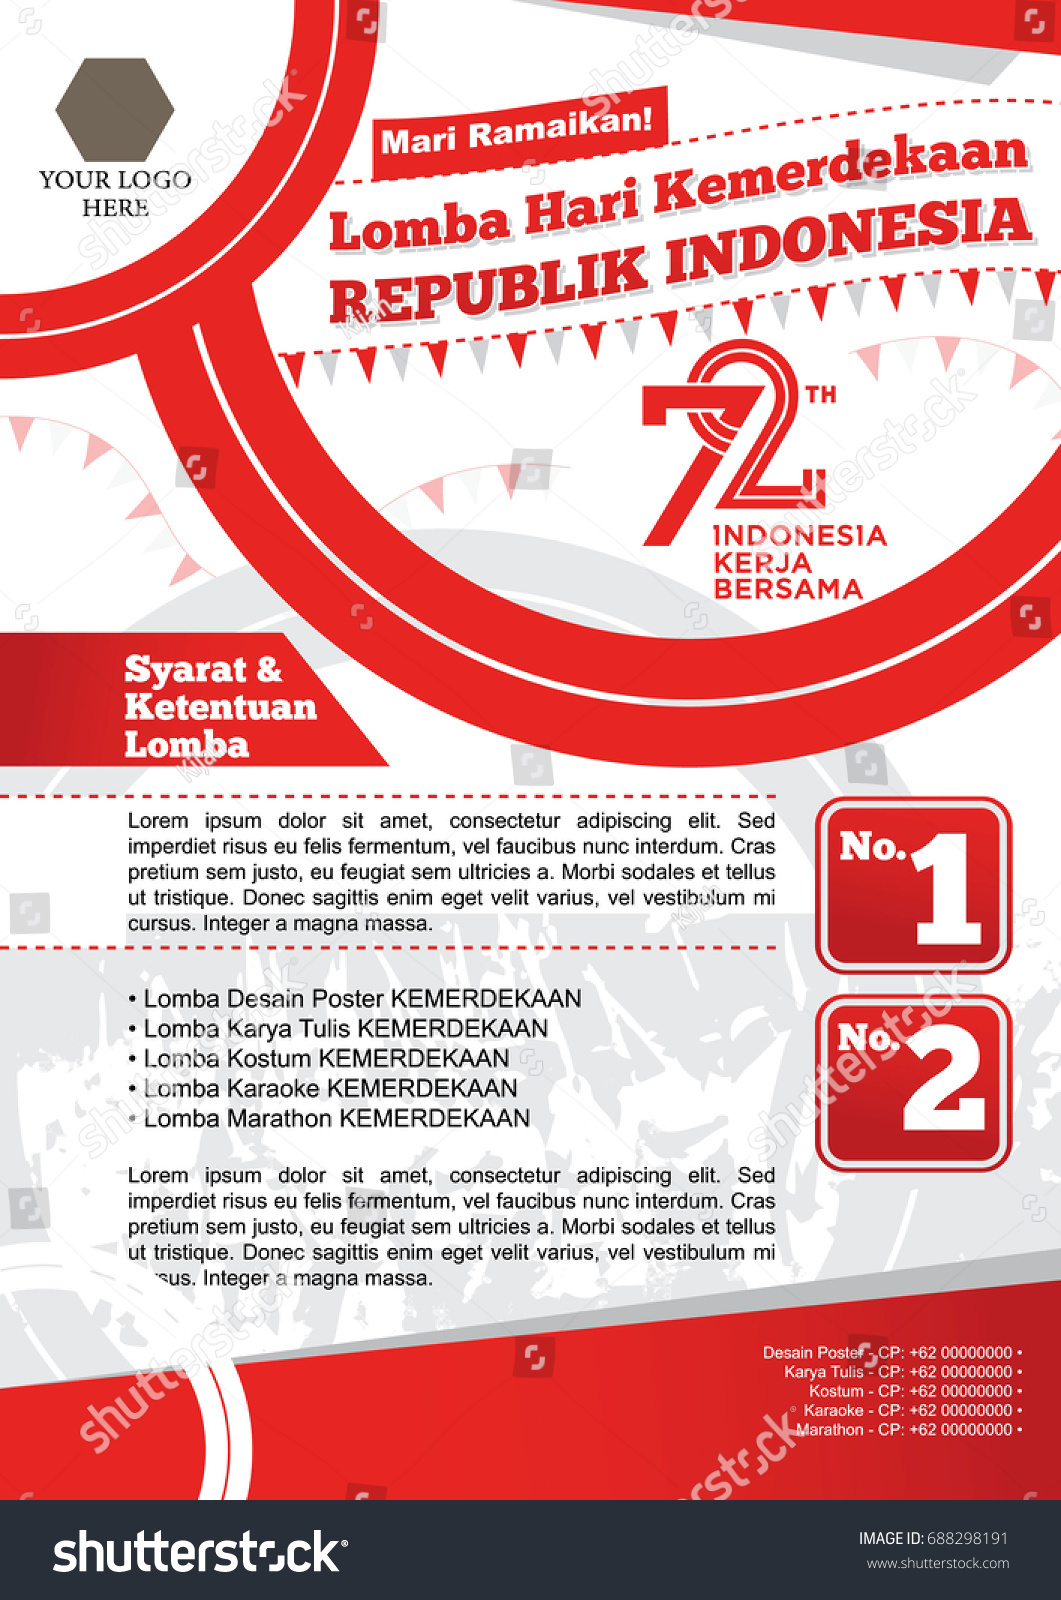 Detail Contoh Poster Lomba Nomer 51